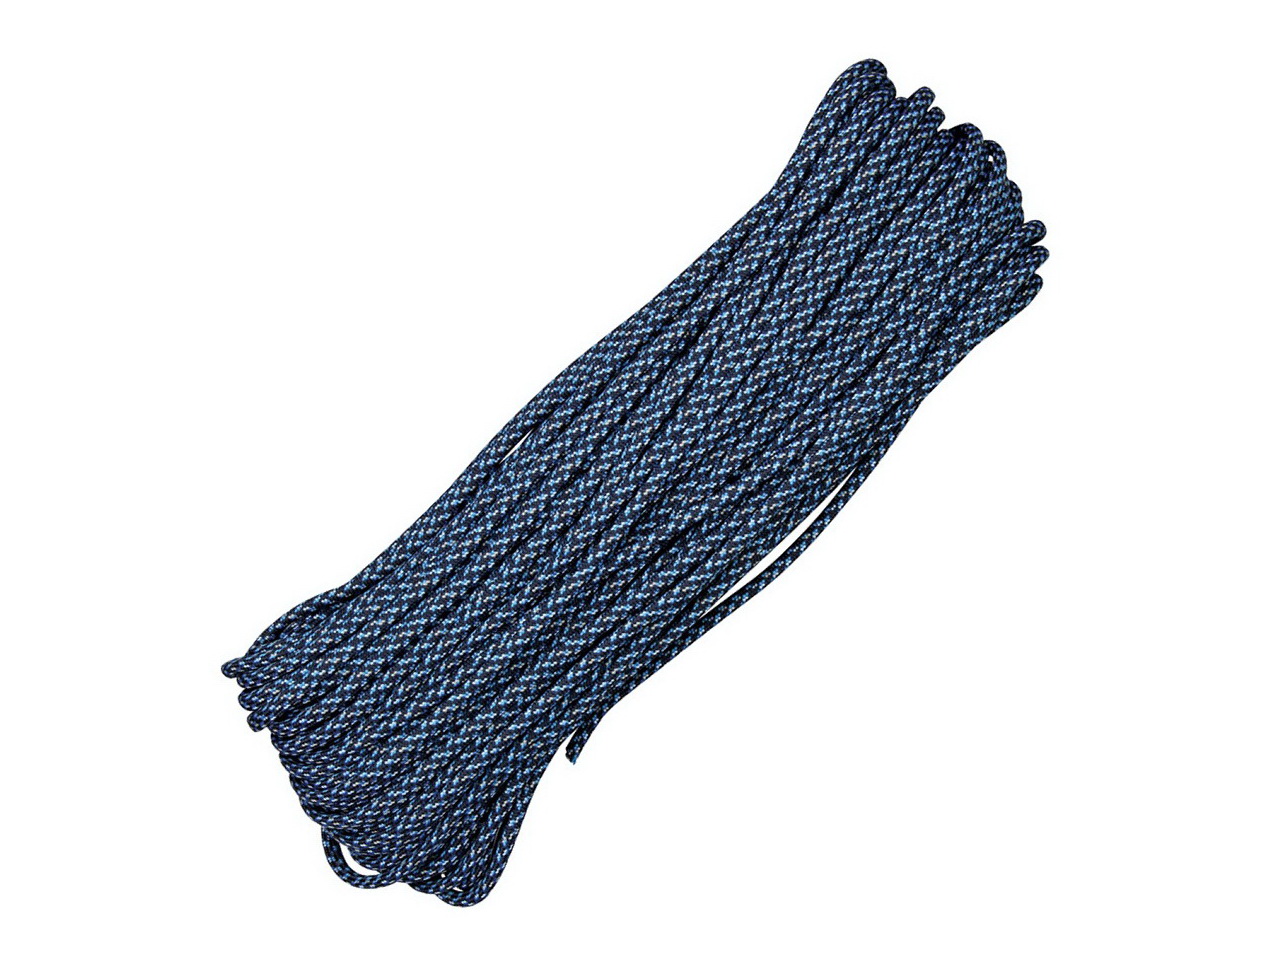 E-shop Atwood Rope MFG Paracord 550 Blue Speck